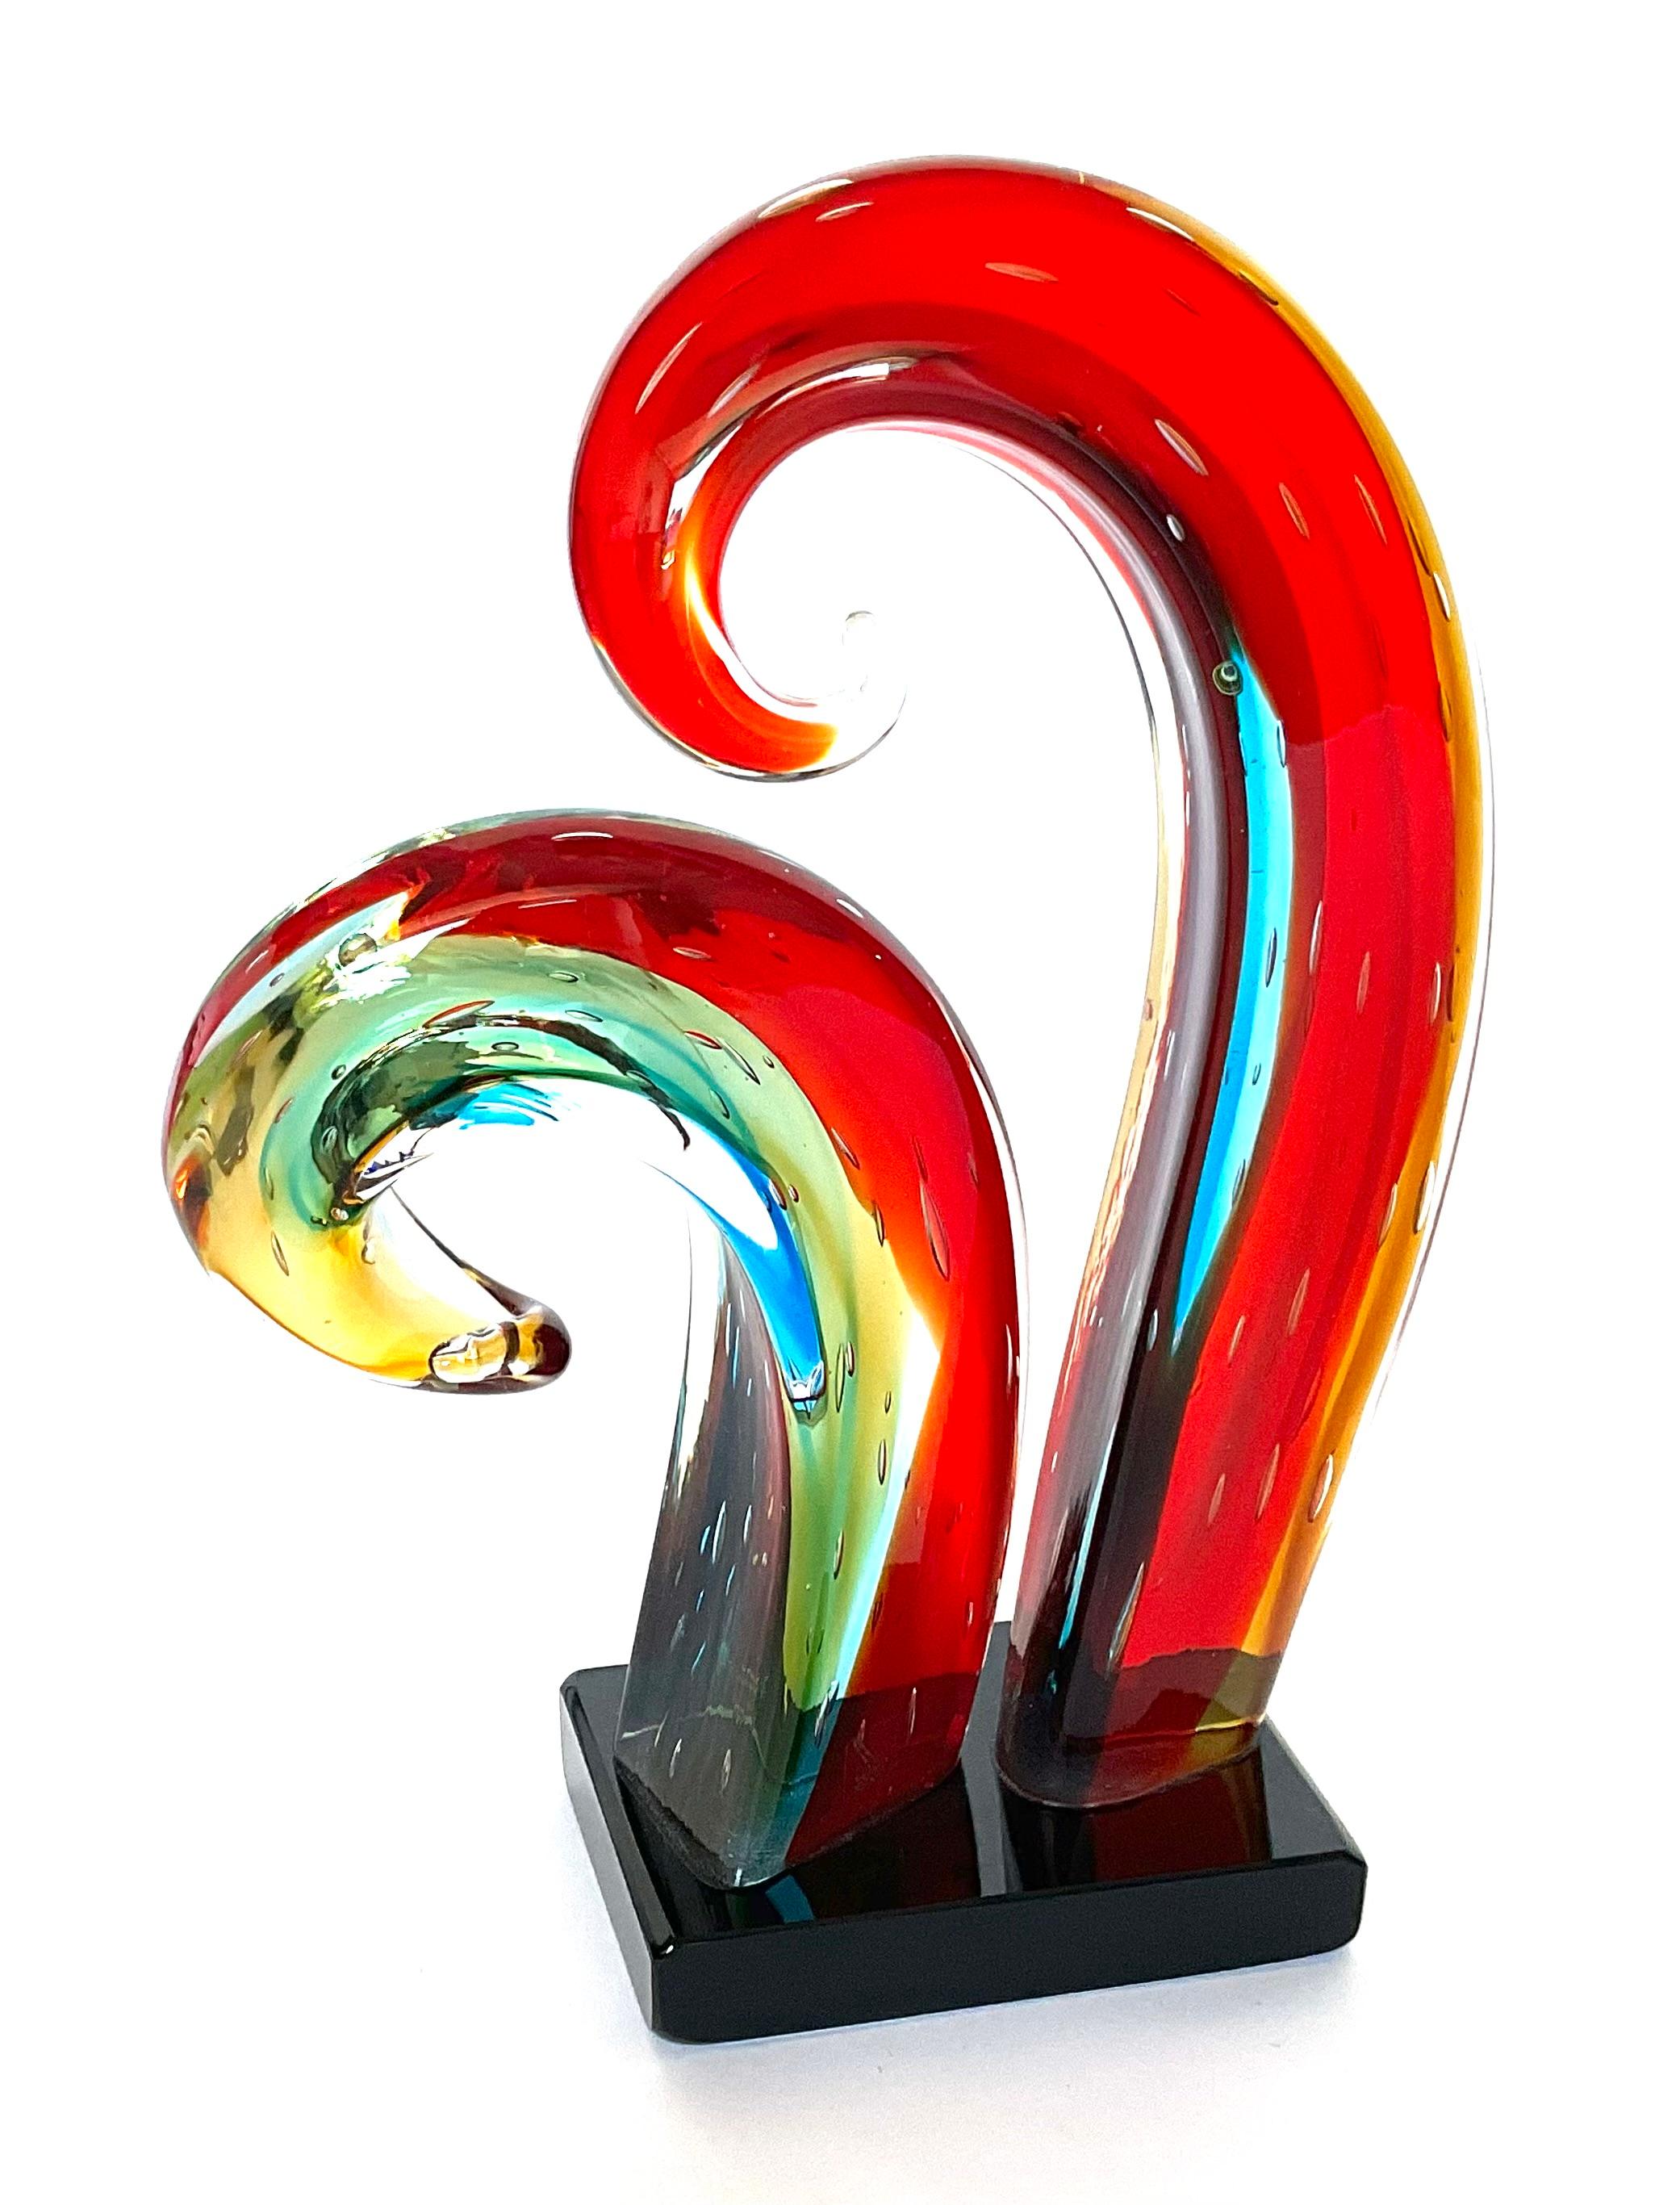 Late 20th Century Large Murano Art Glass Sculpture in vibrant colors by Sergio Costatini  For Sale